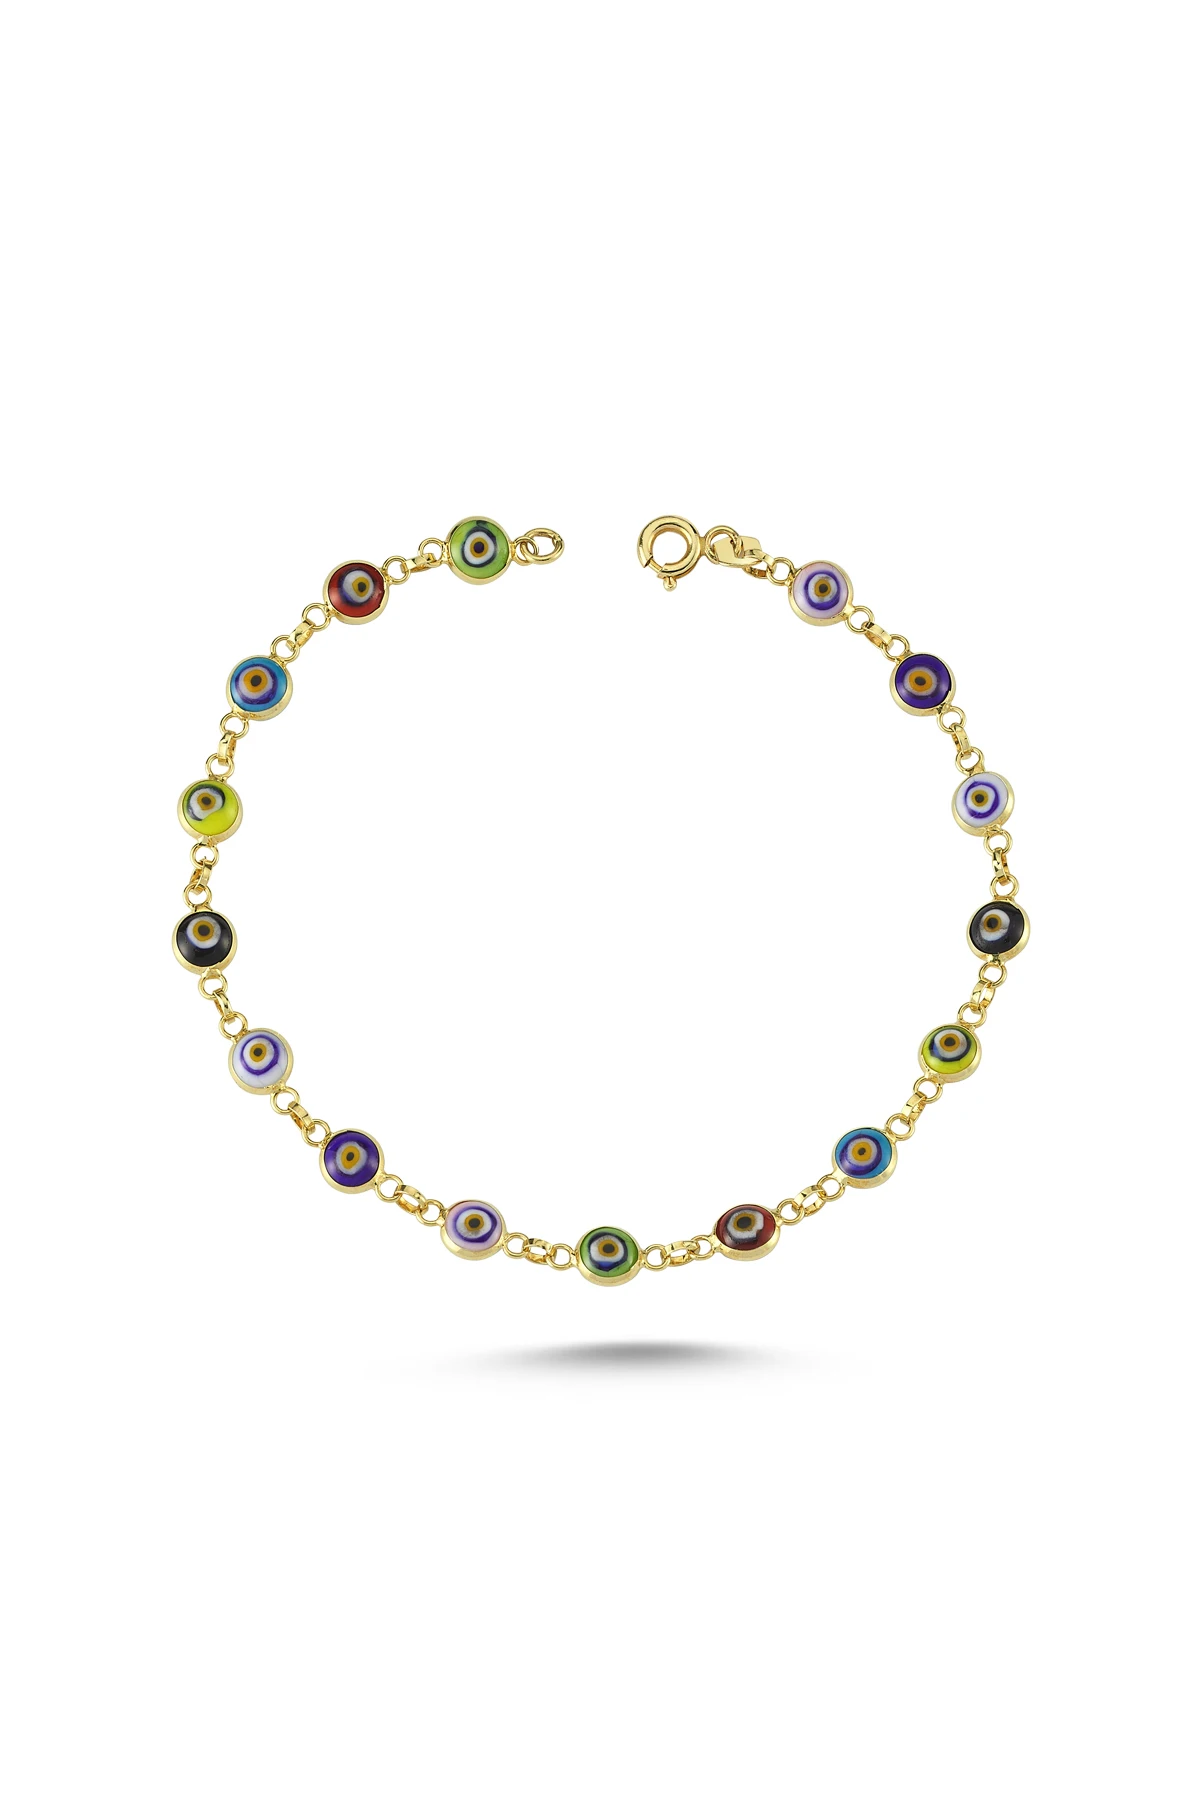 

Gold Evil Eye Beaded Colorful Stone Bracelet TTGBLANZ107 - Certified 14K Gold – A perfect gift for your Loved Ones